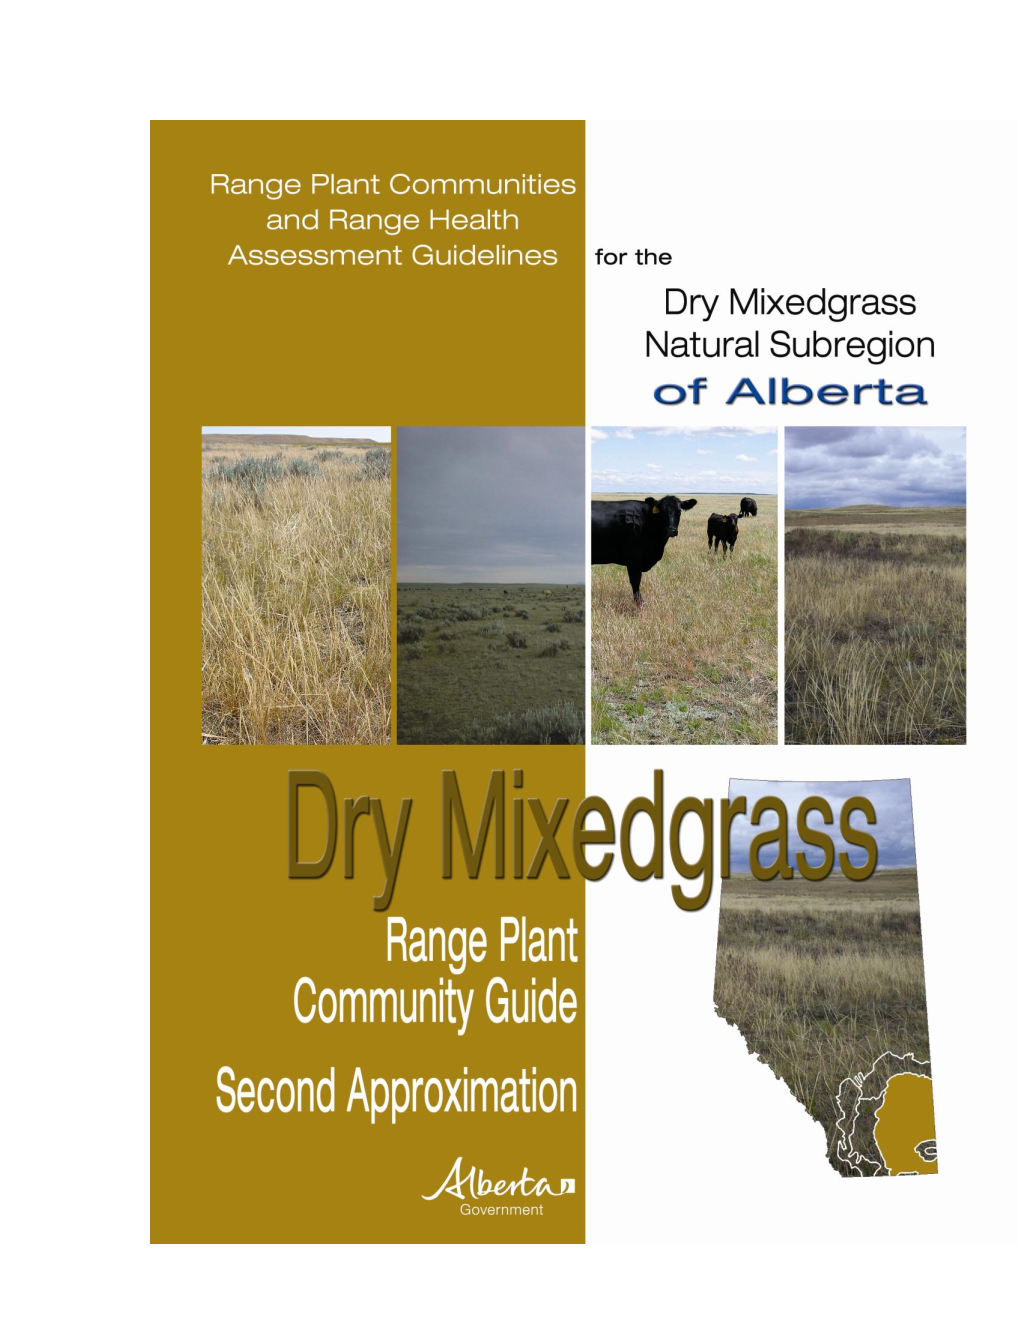 Range Plant Communities and Range Health Assessment Guidelines for the Dry Mixedgrass Natural Subregion of Alberta